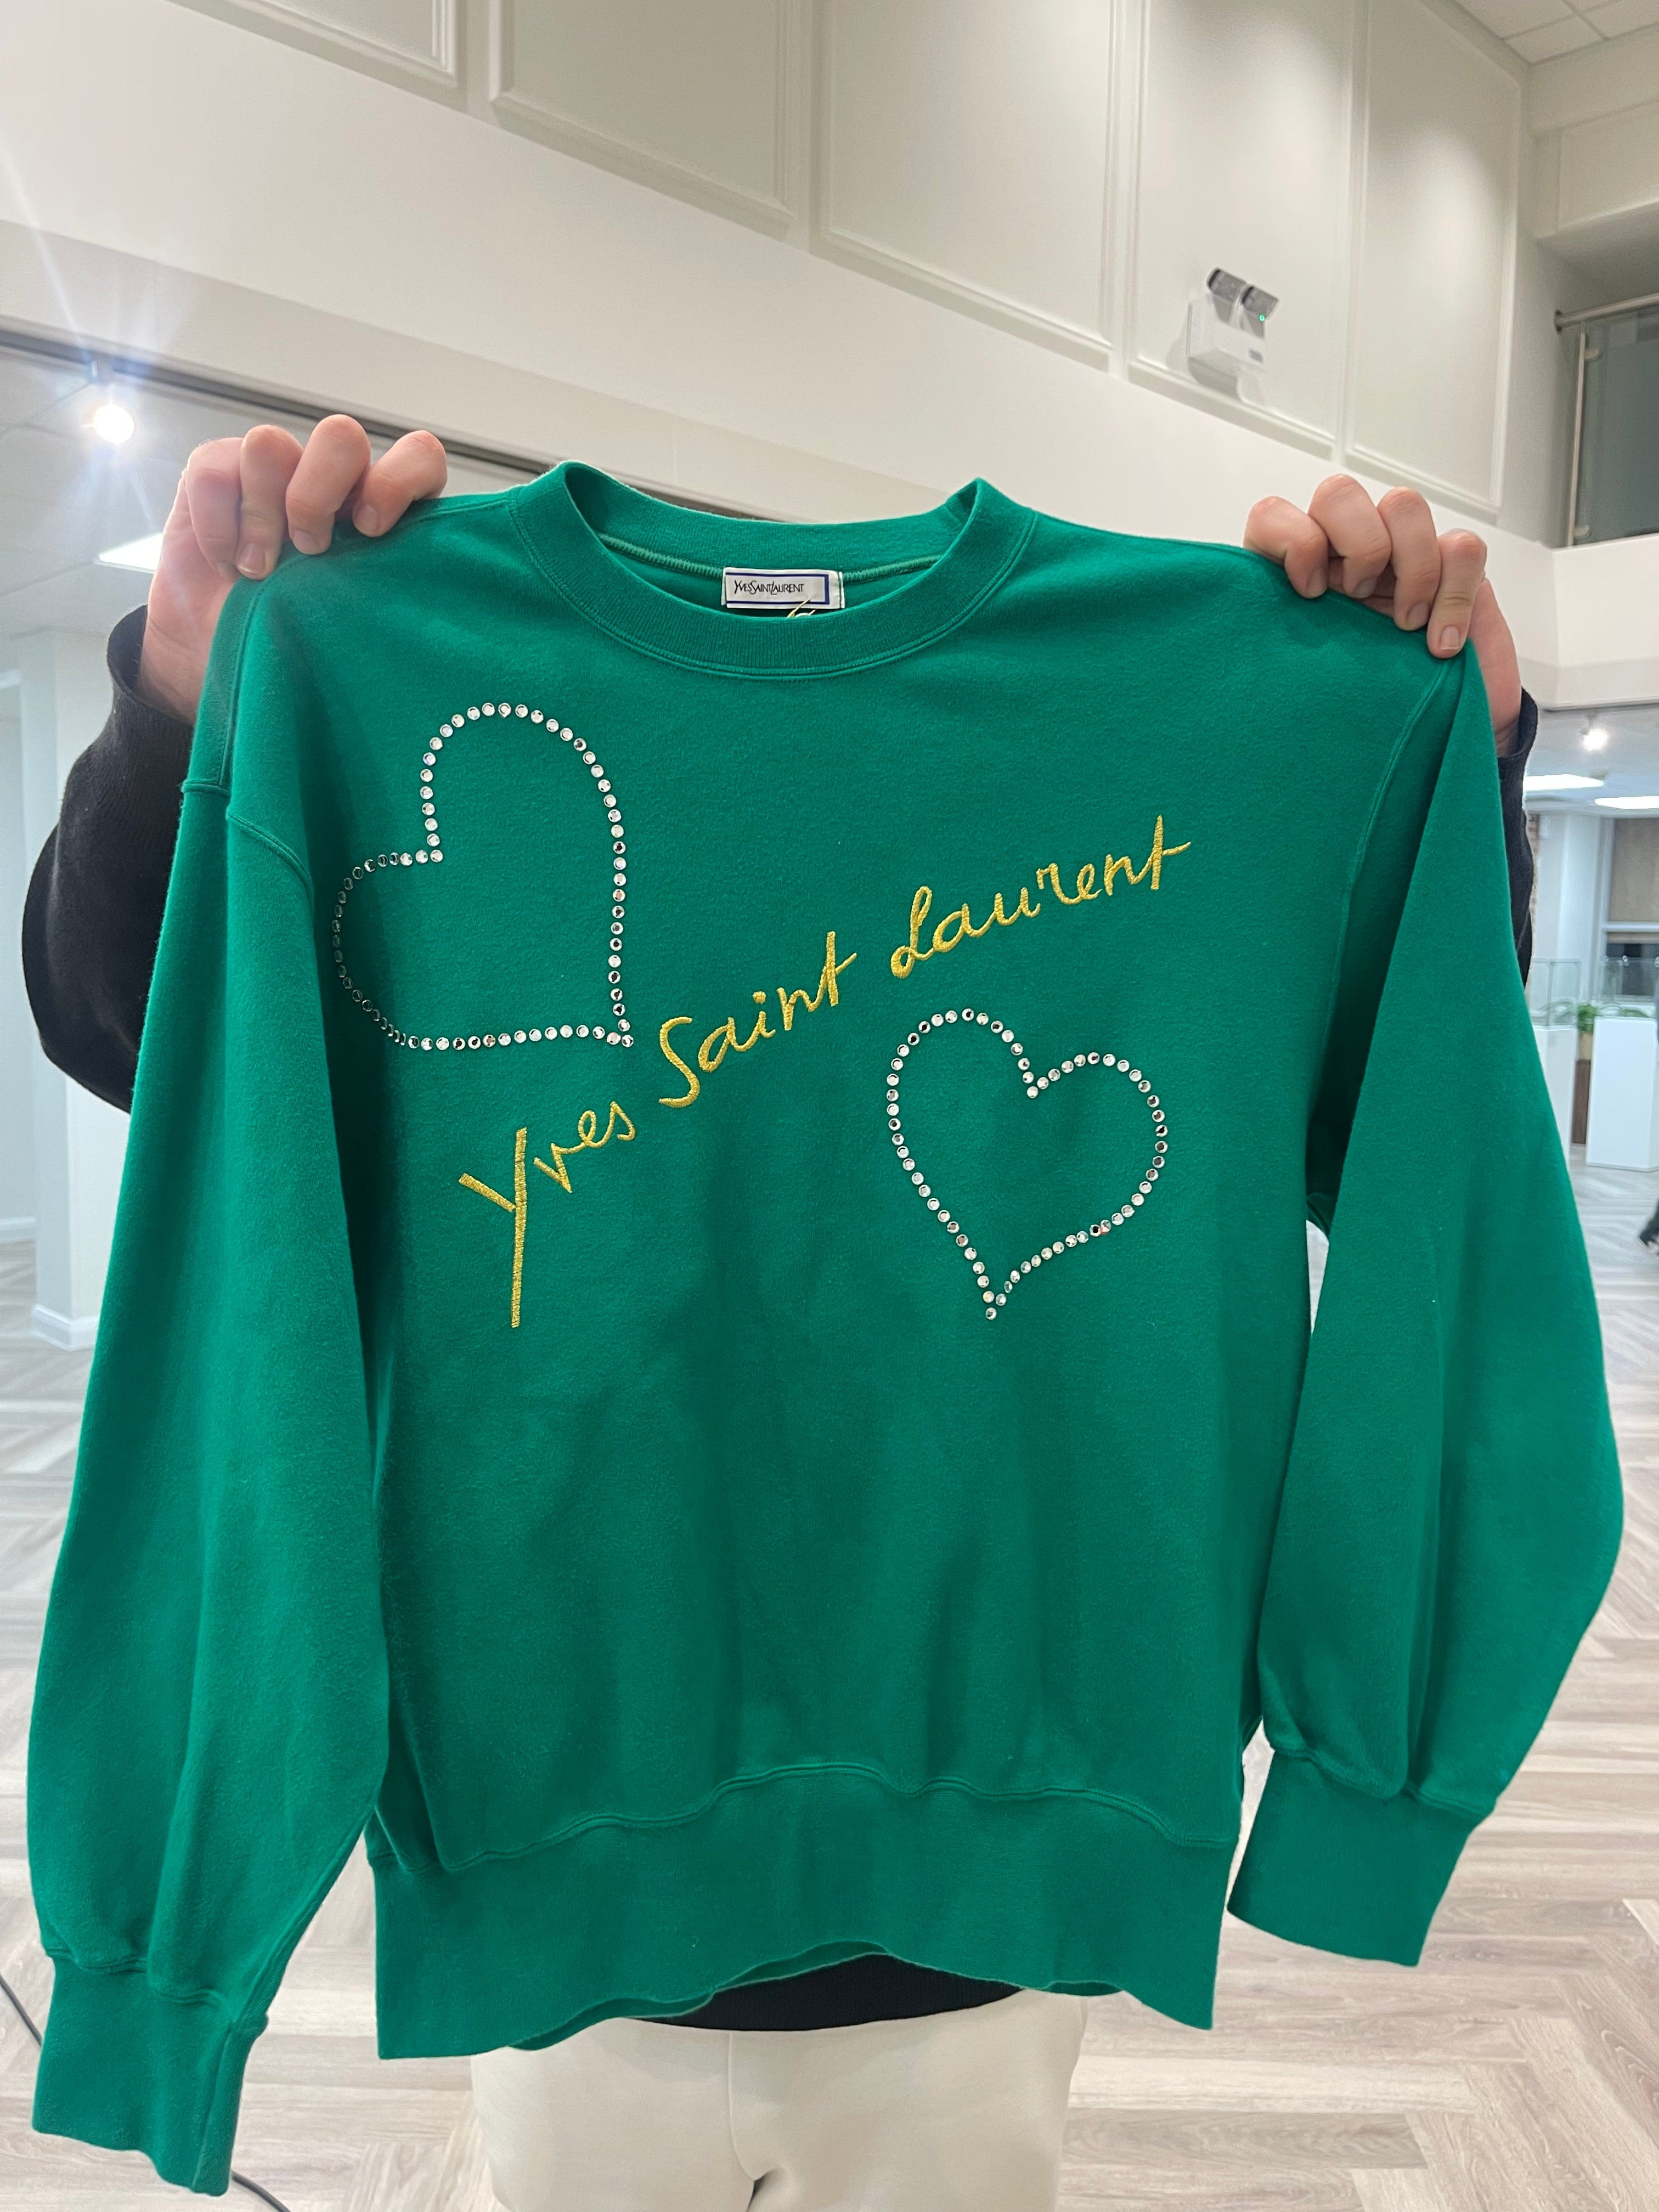 AUCTION FOR CHARITY YSL jumper ALC0281